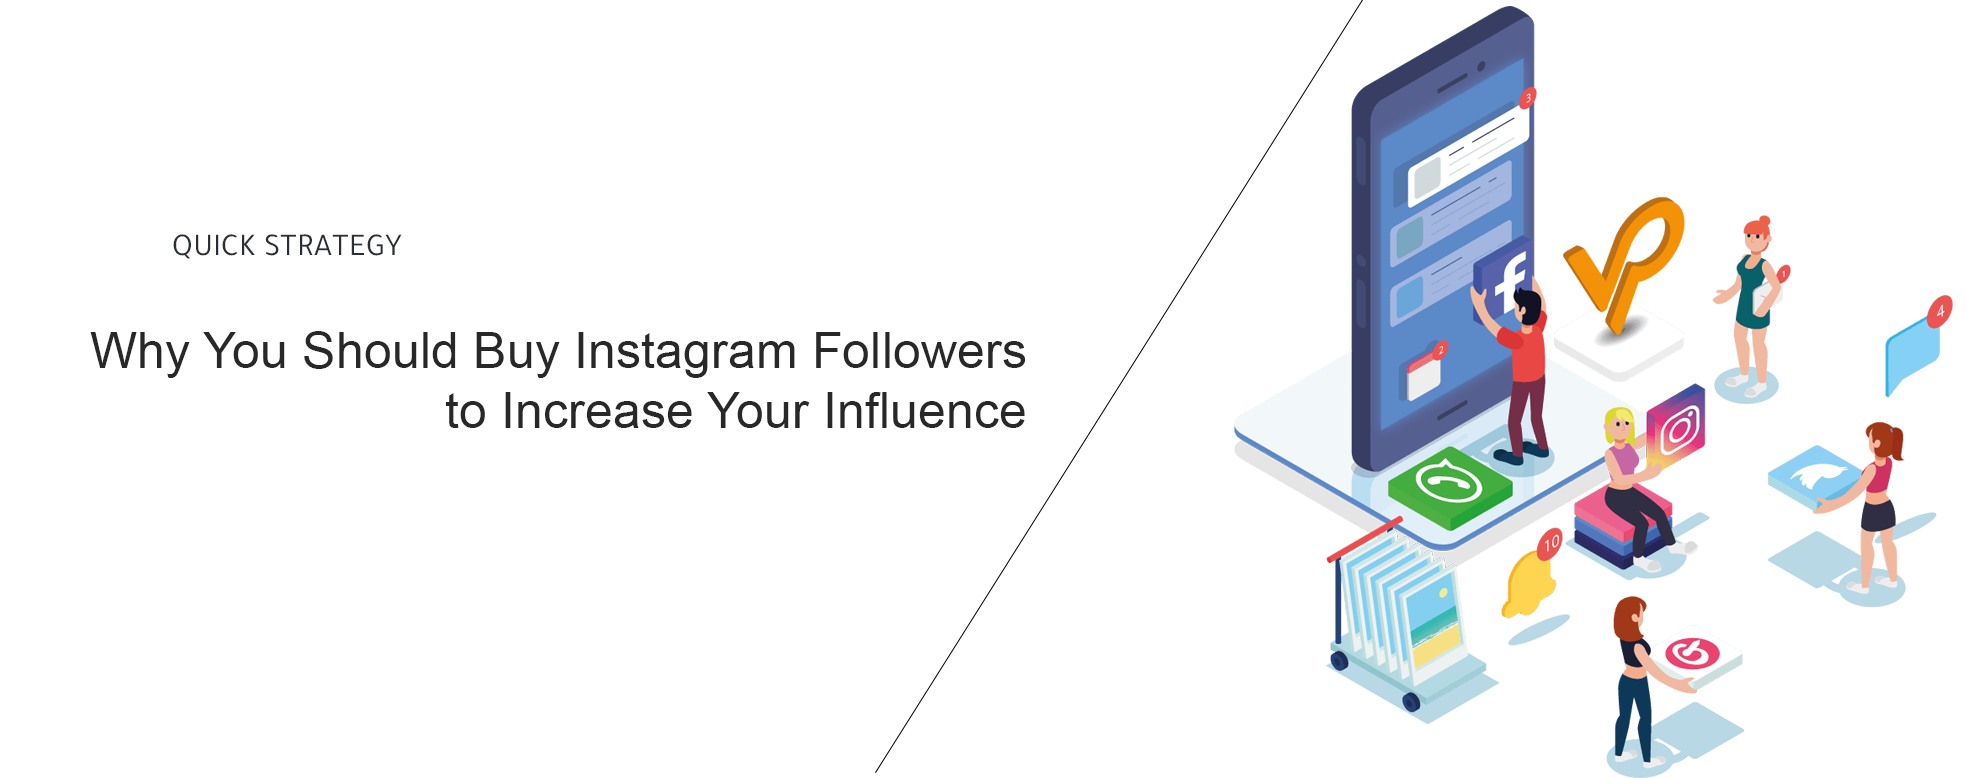 Why You Should Buy Instagram Followers to Increase Your Influence